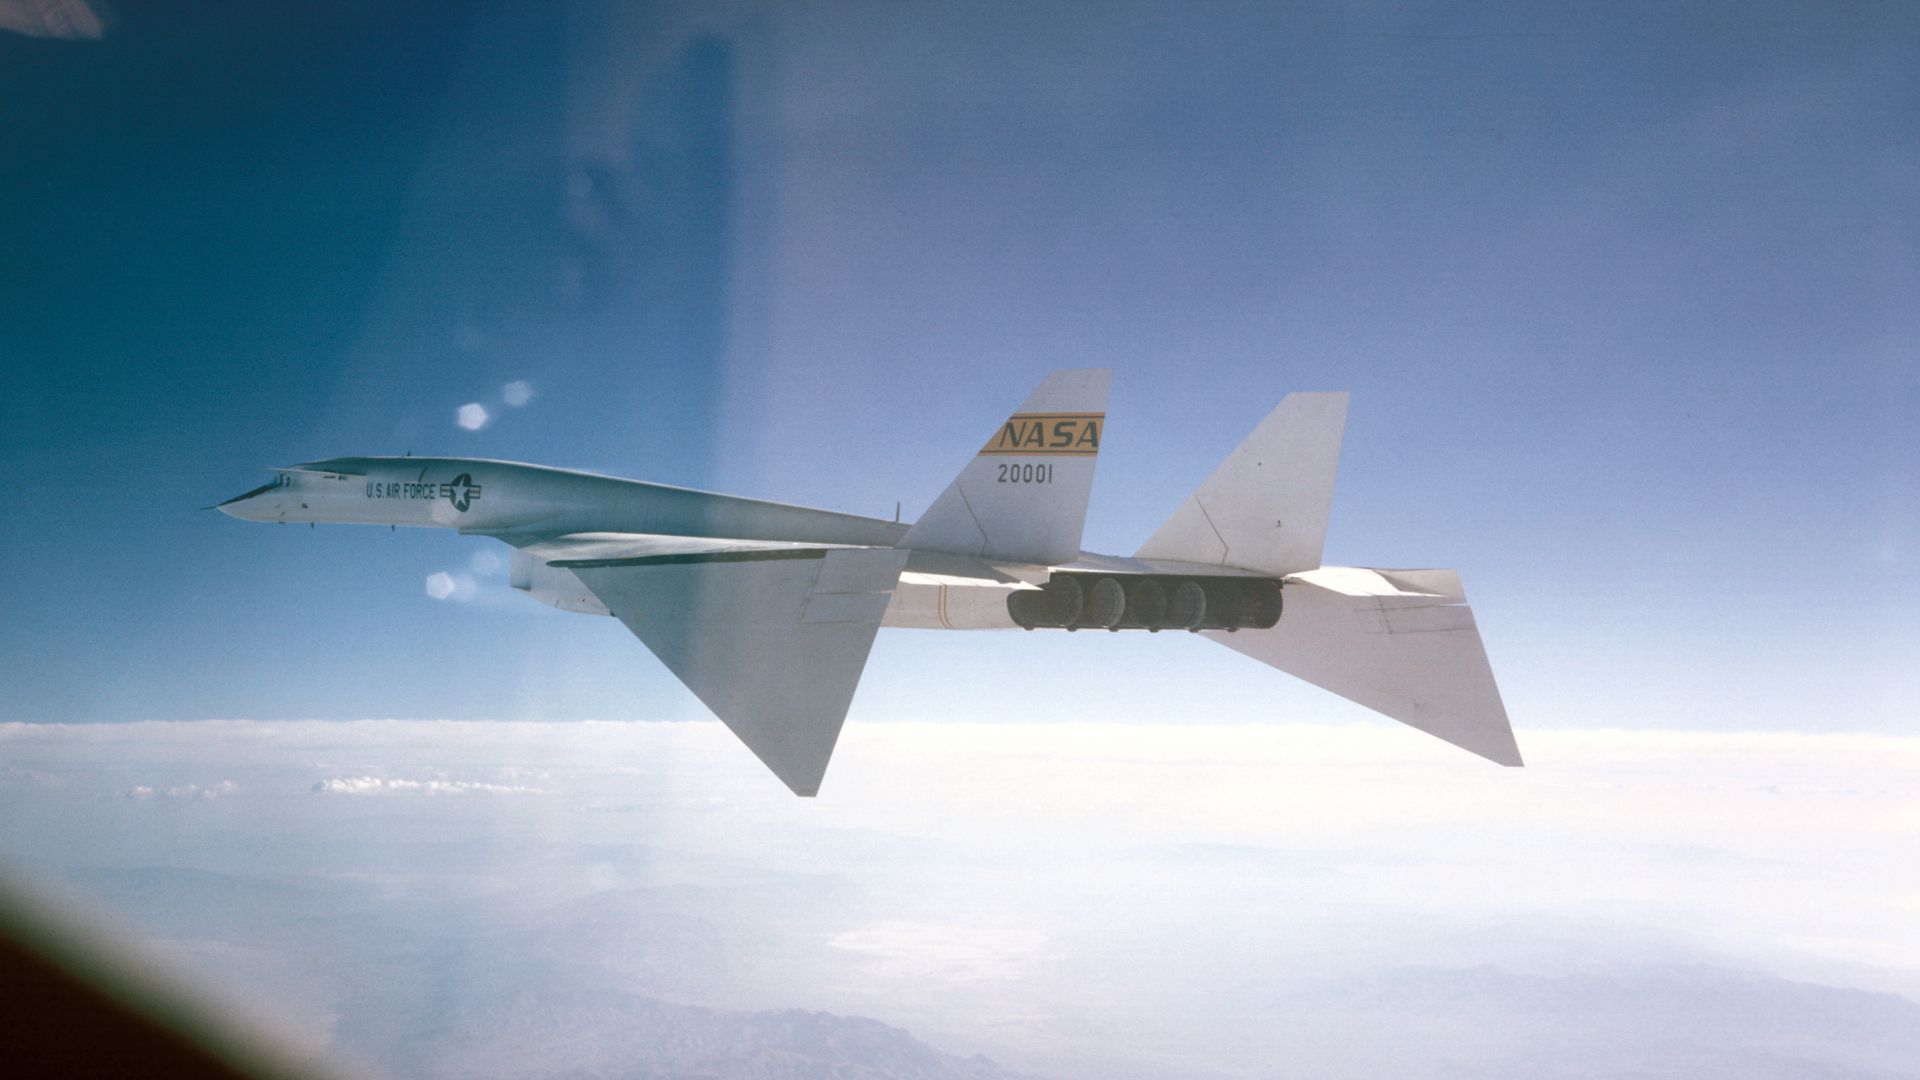 North American XB-70 Valkyrie, fighter aircraft, U.S. Air Force (horizontal)